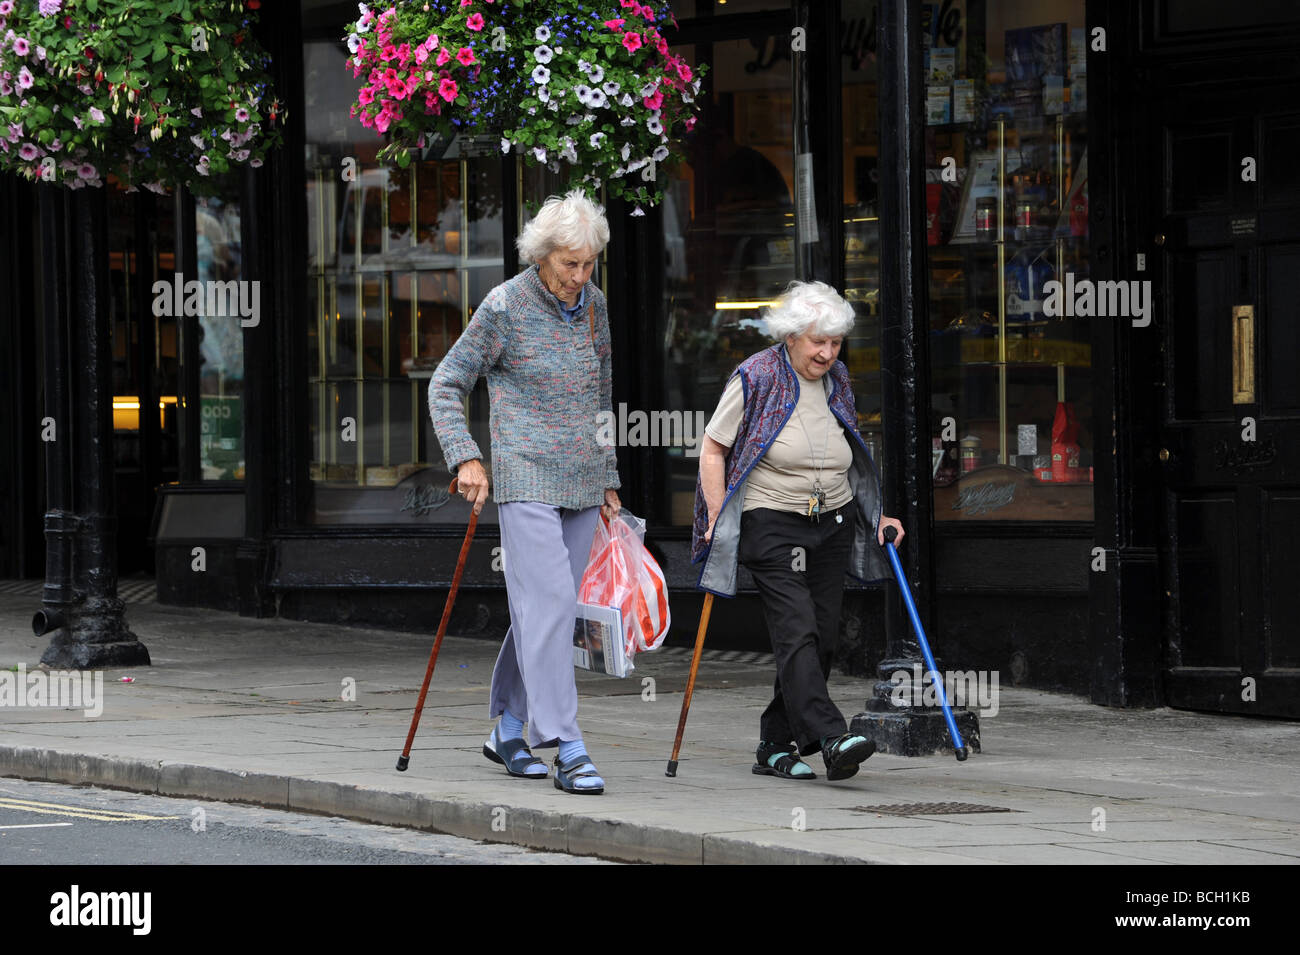 Two elderly ladies out walking Stock Photo